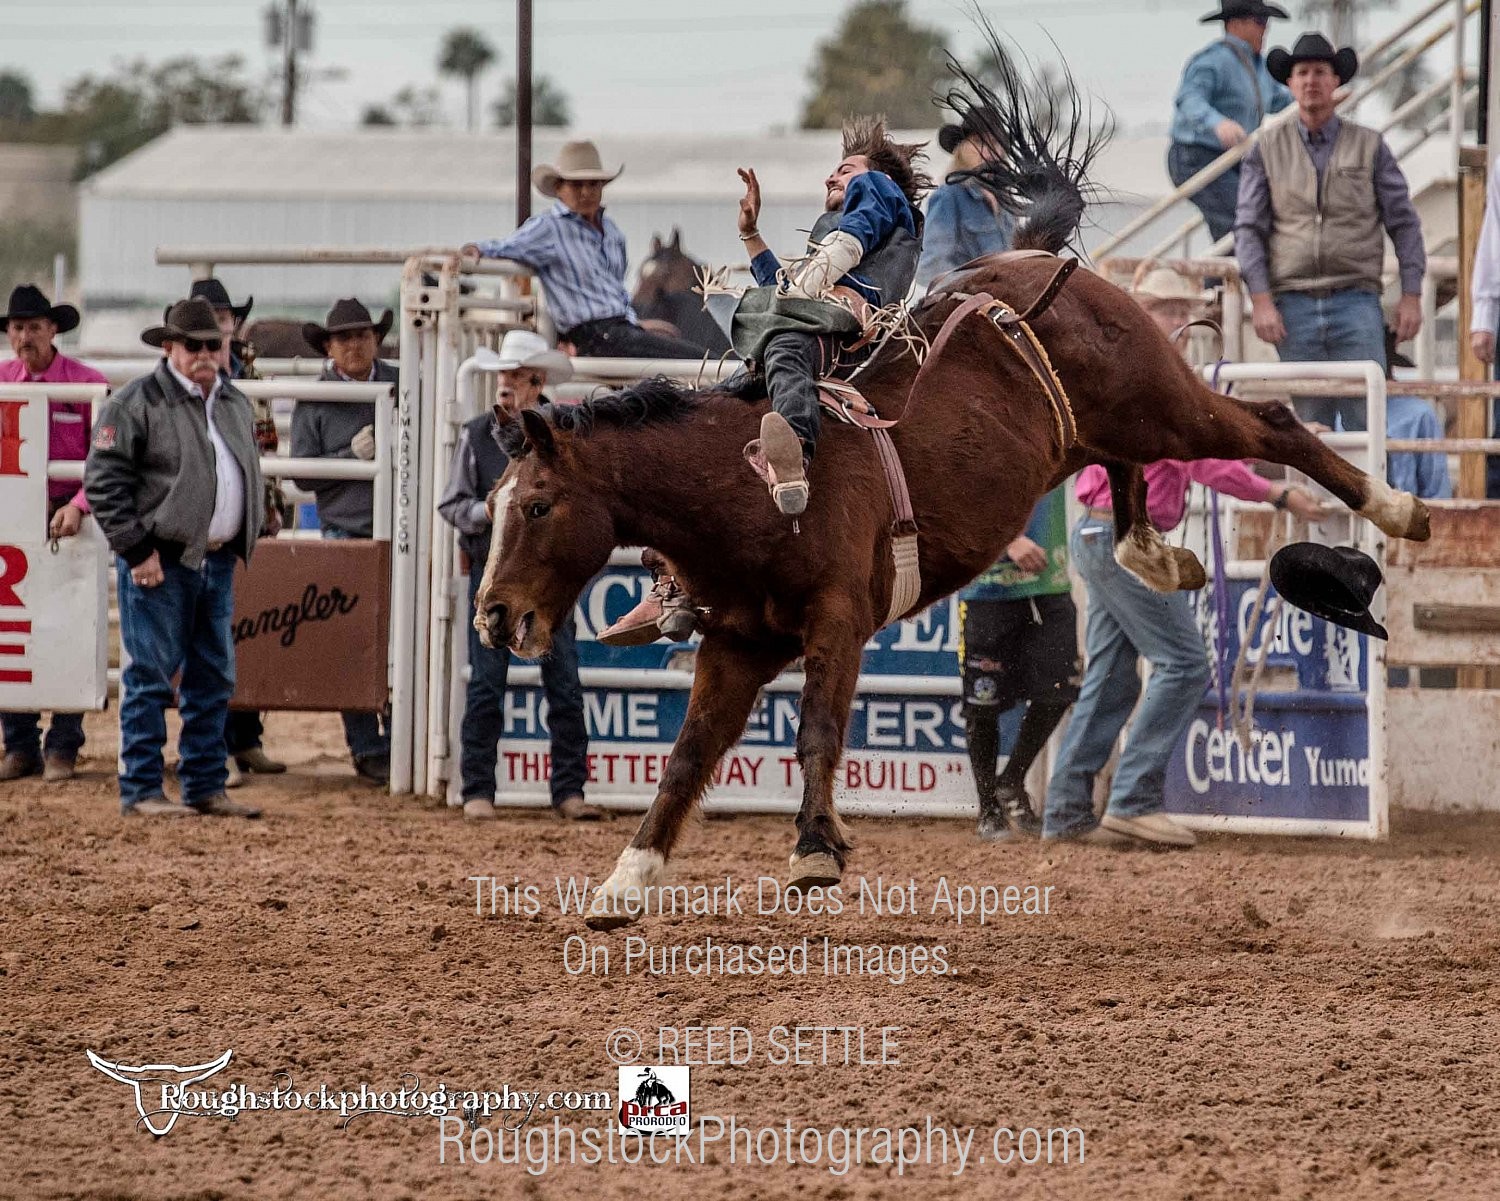 BareBack Rodeo/Event 2019 Yuma Silver Spur PRCA Rodeo Perf 2